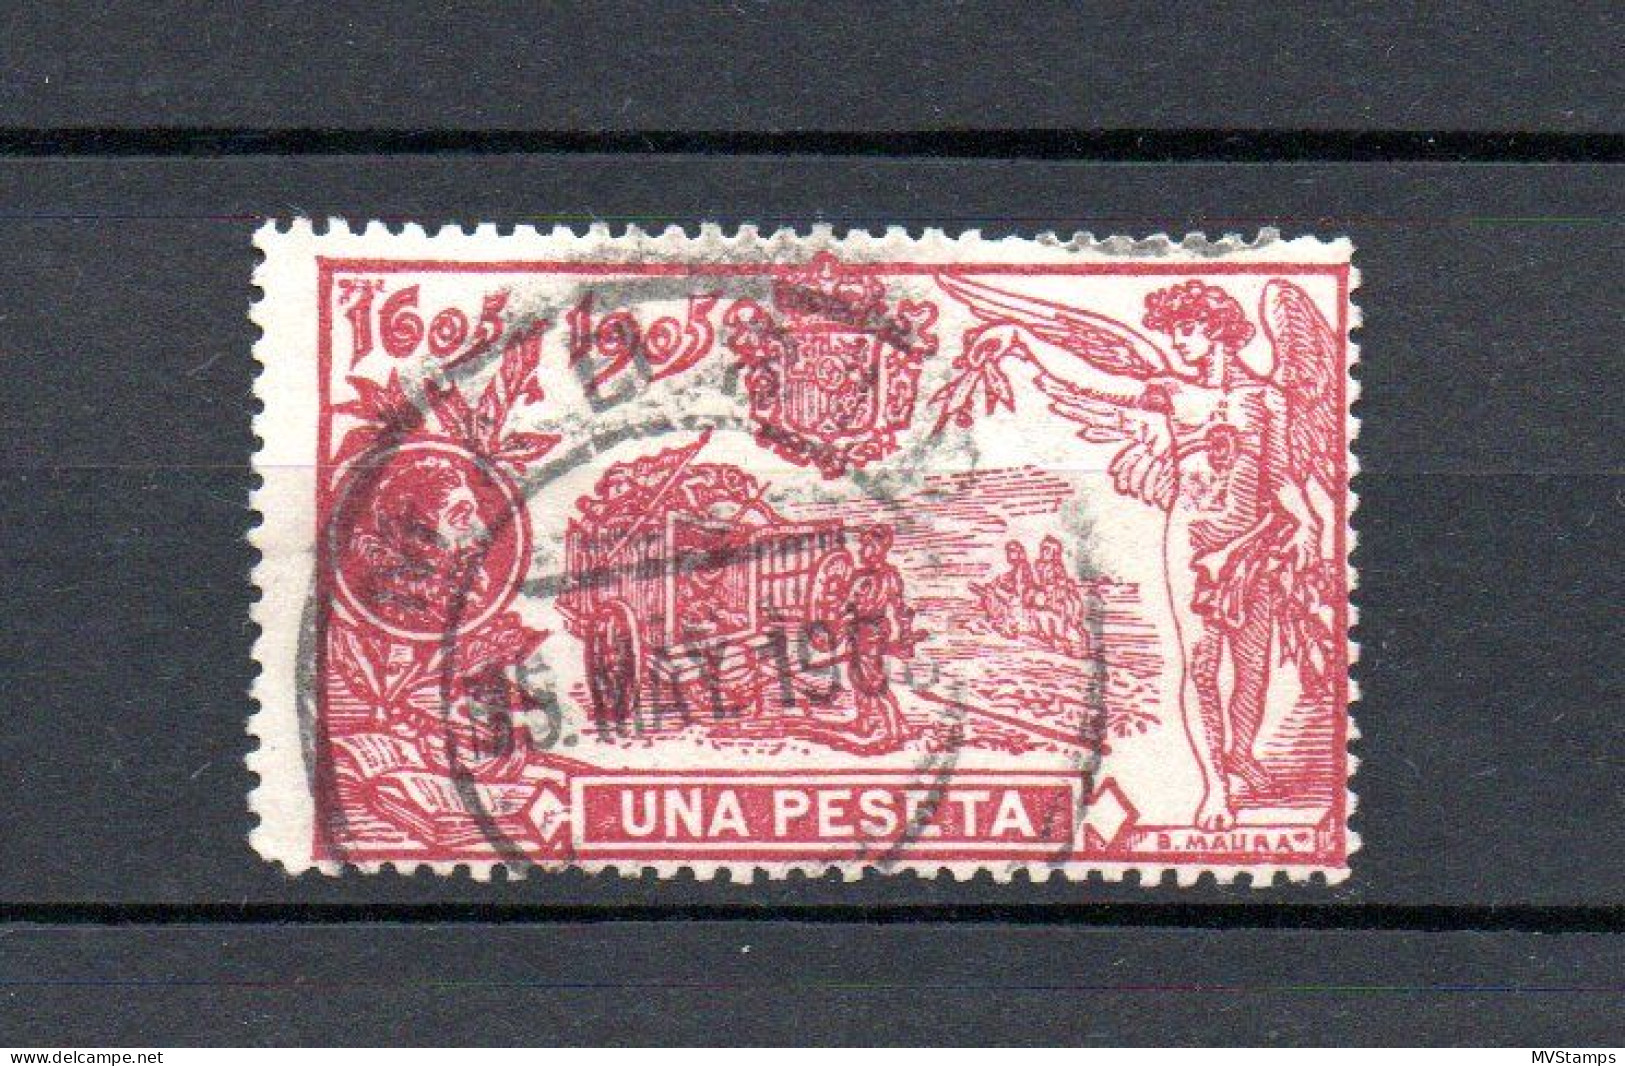 Spain 1905 Old 1 Peseta Don Quijote Stamps (Michel 227) Nice Used - Gebraucht